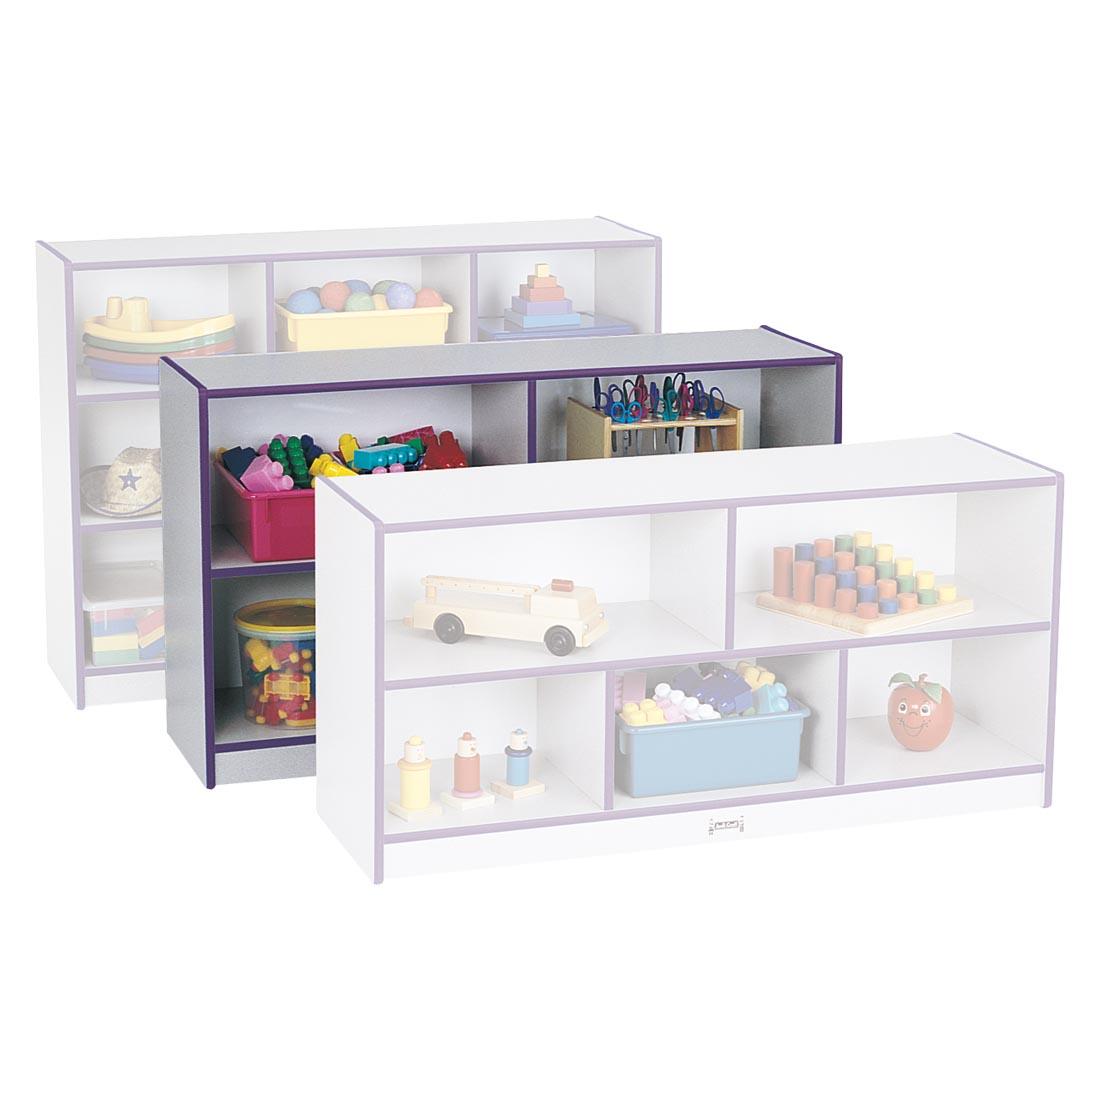 Purple Edge Rainbow Accents Single Mobile Storage Unit Low Height with a unit both in front and behind to show scale; shown with suggested storage contents